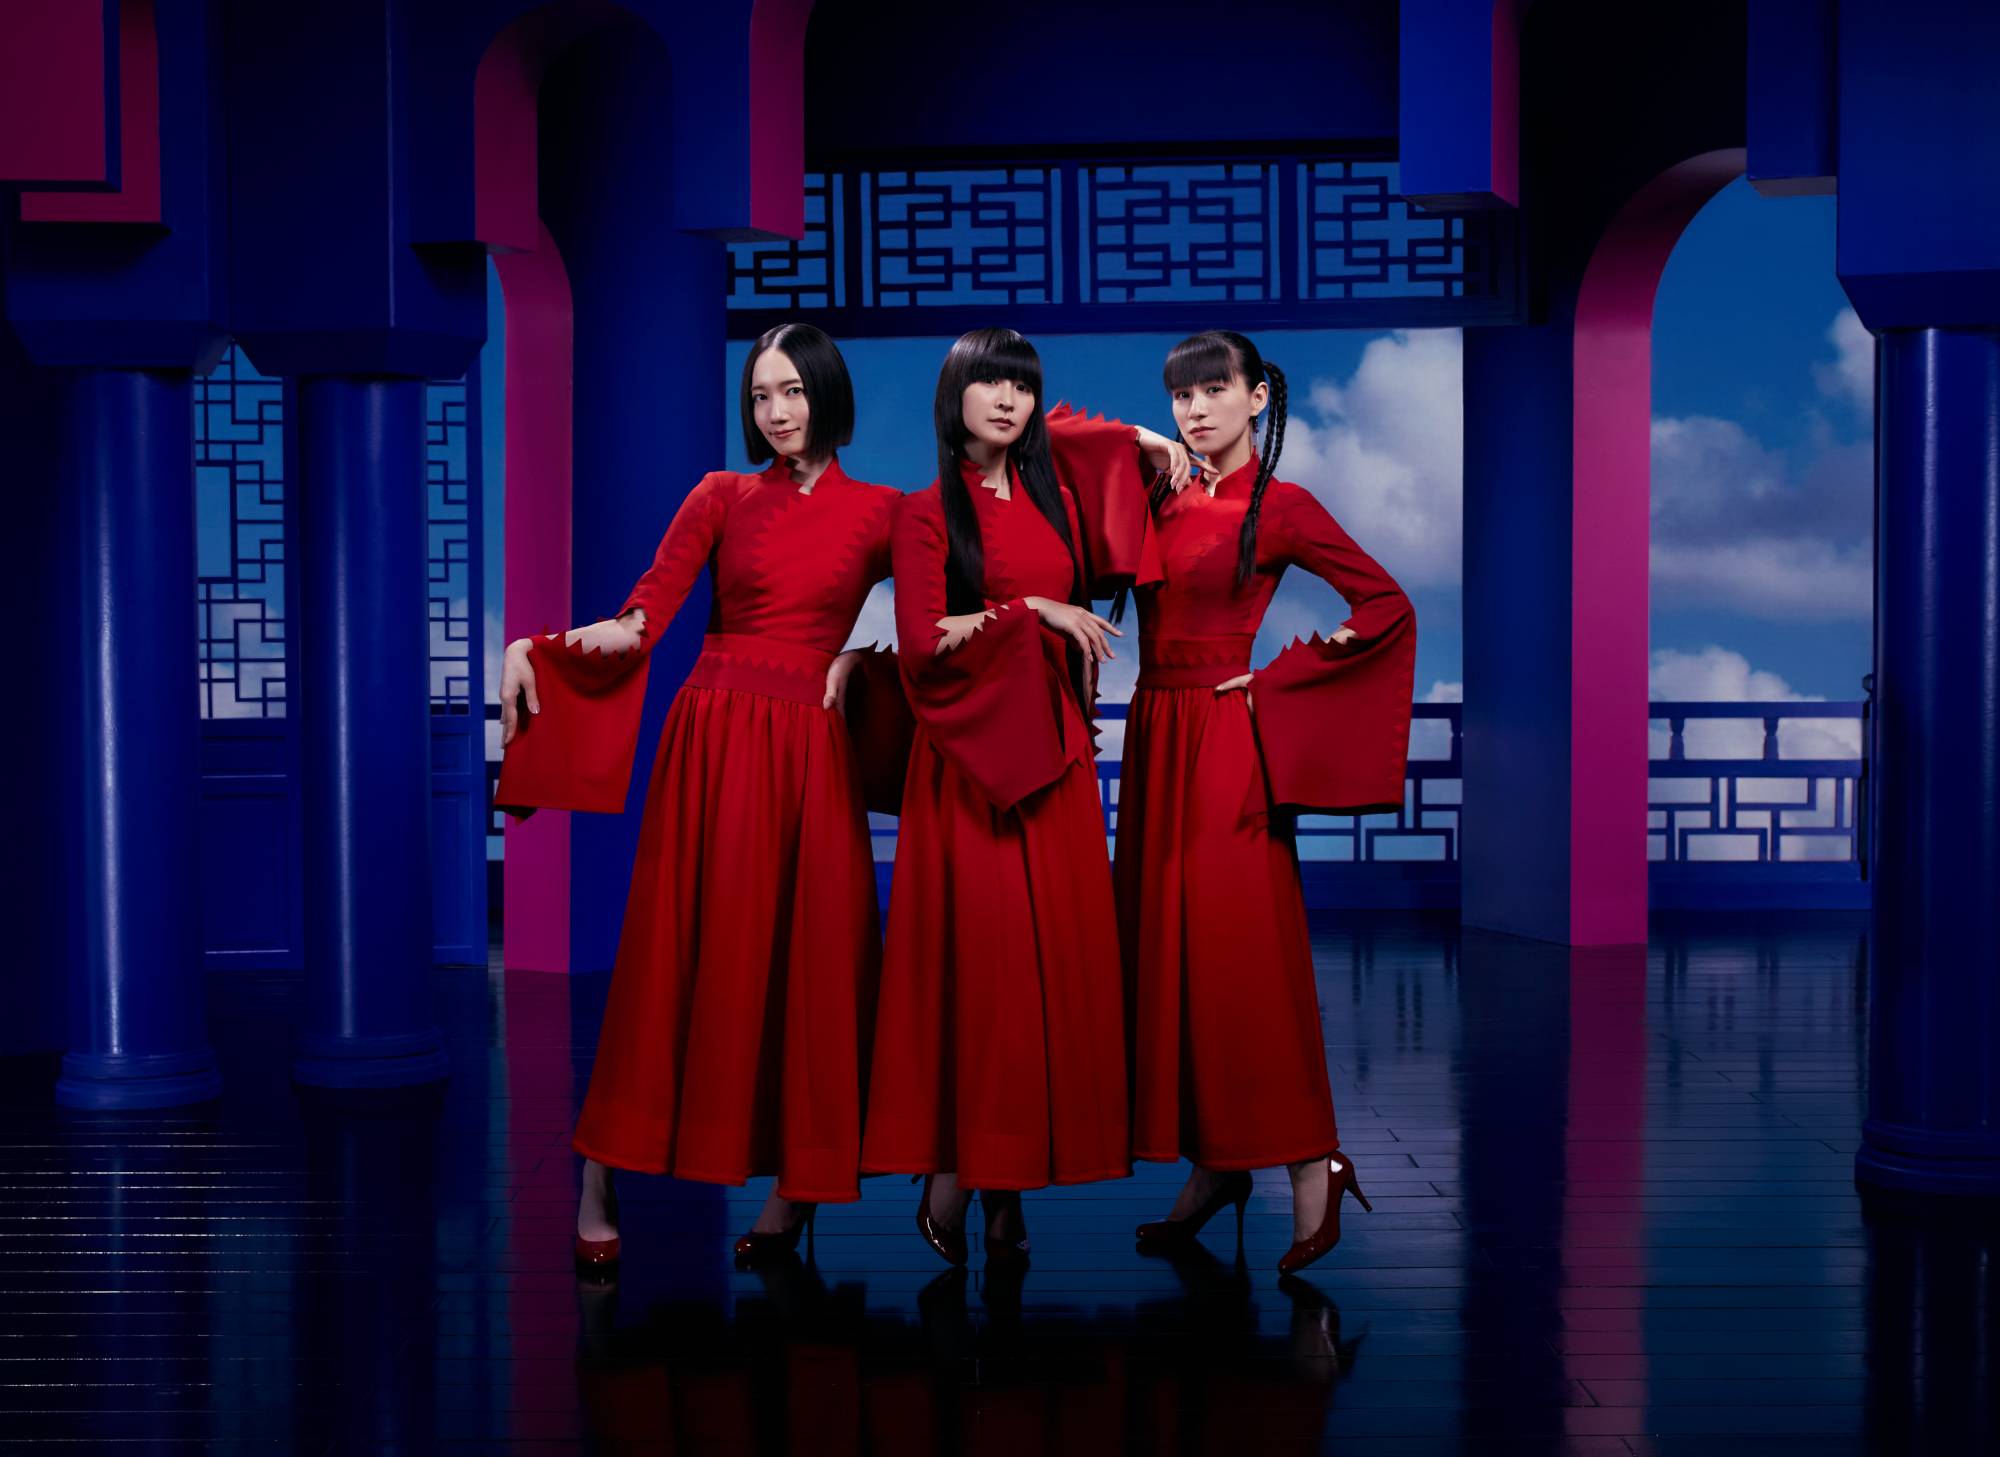 For Perfume’s seventh full-length album, “Plasma,” producer Yasutaka Nakata softens the group’s buzzing electronic textures to craft a collection of breezy synth-disco reminiscent of “city pop,” a genre of music that came out of Japan’s glitzy bubble era. | COURTESY OF UNIVERSAL MUSIC JAPAN